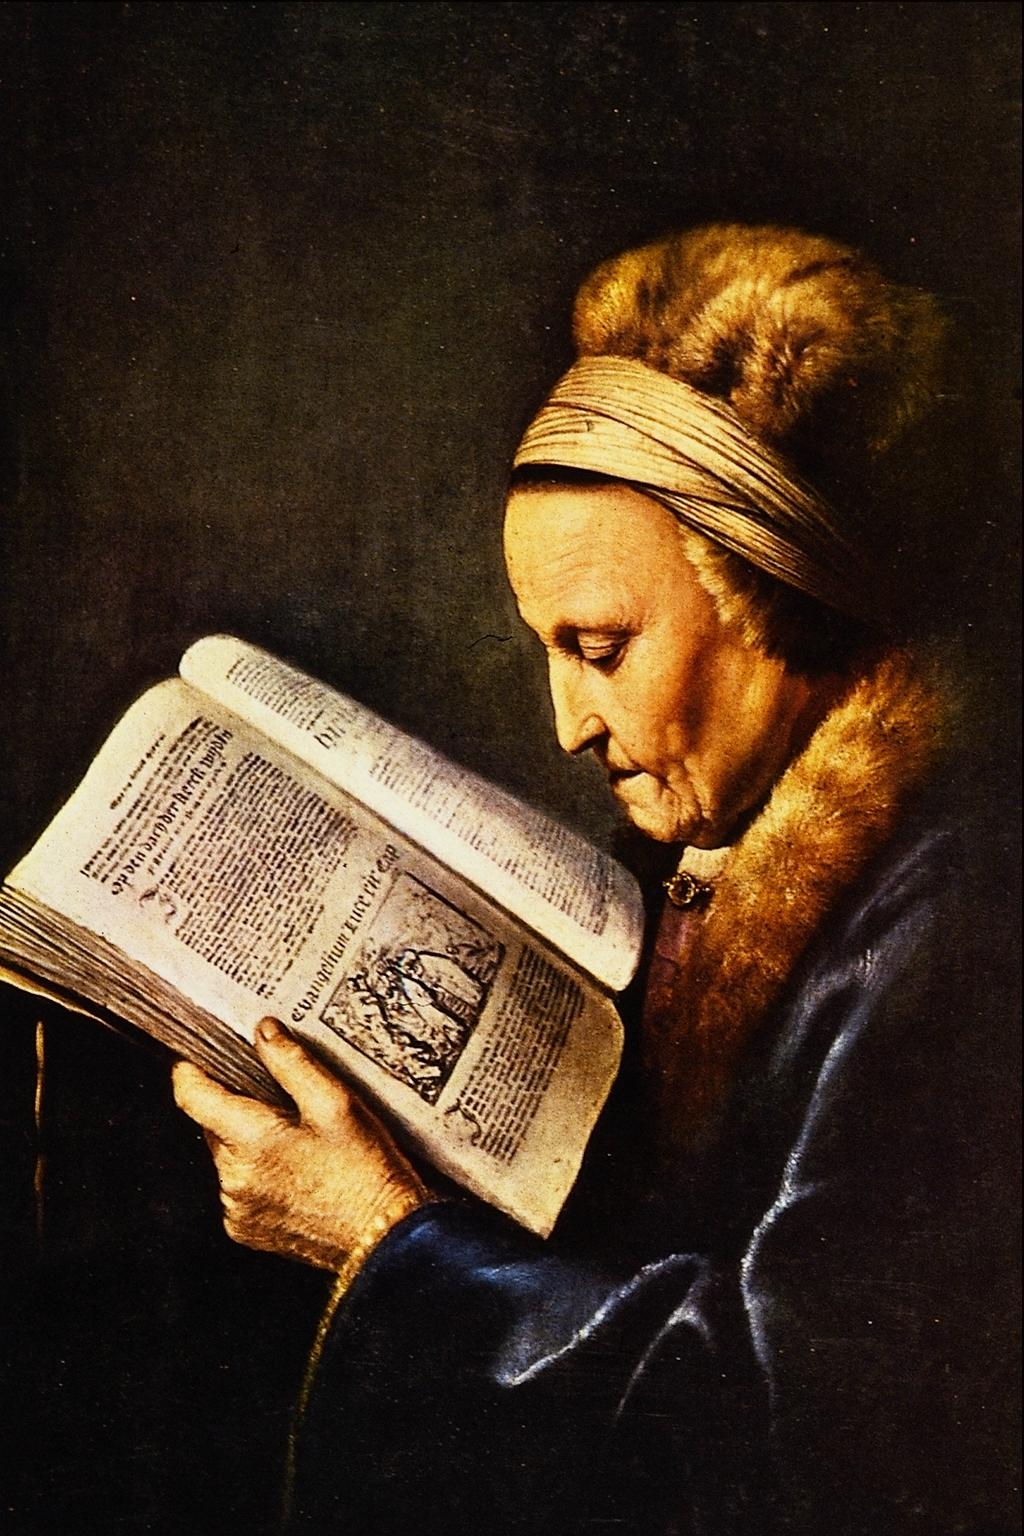 Portrait of an old woman reading - Gerrit Dou - WikiArt.org